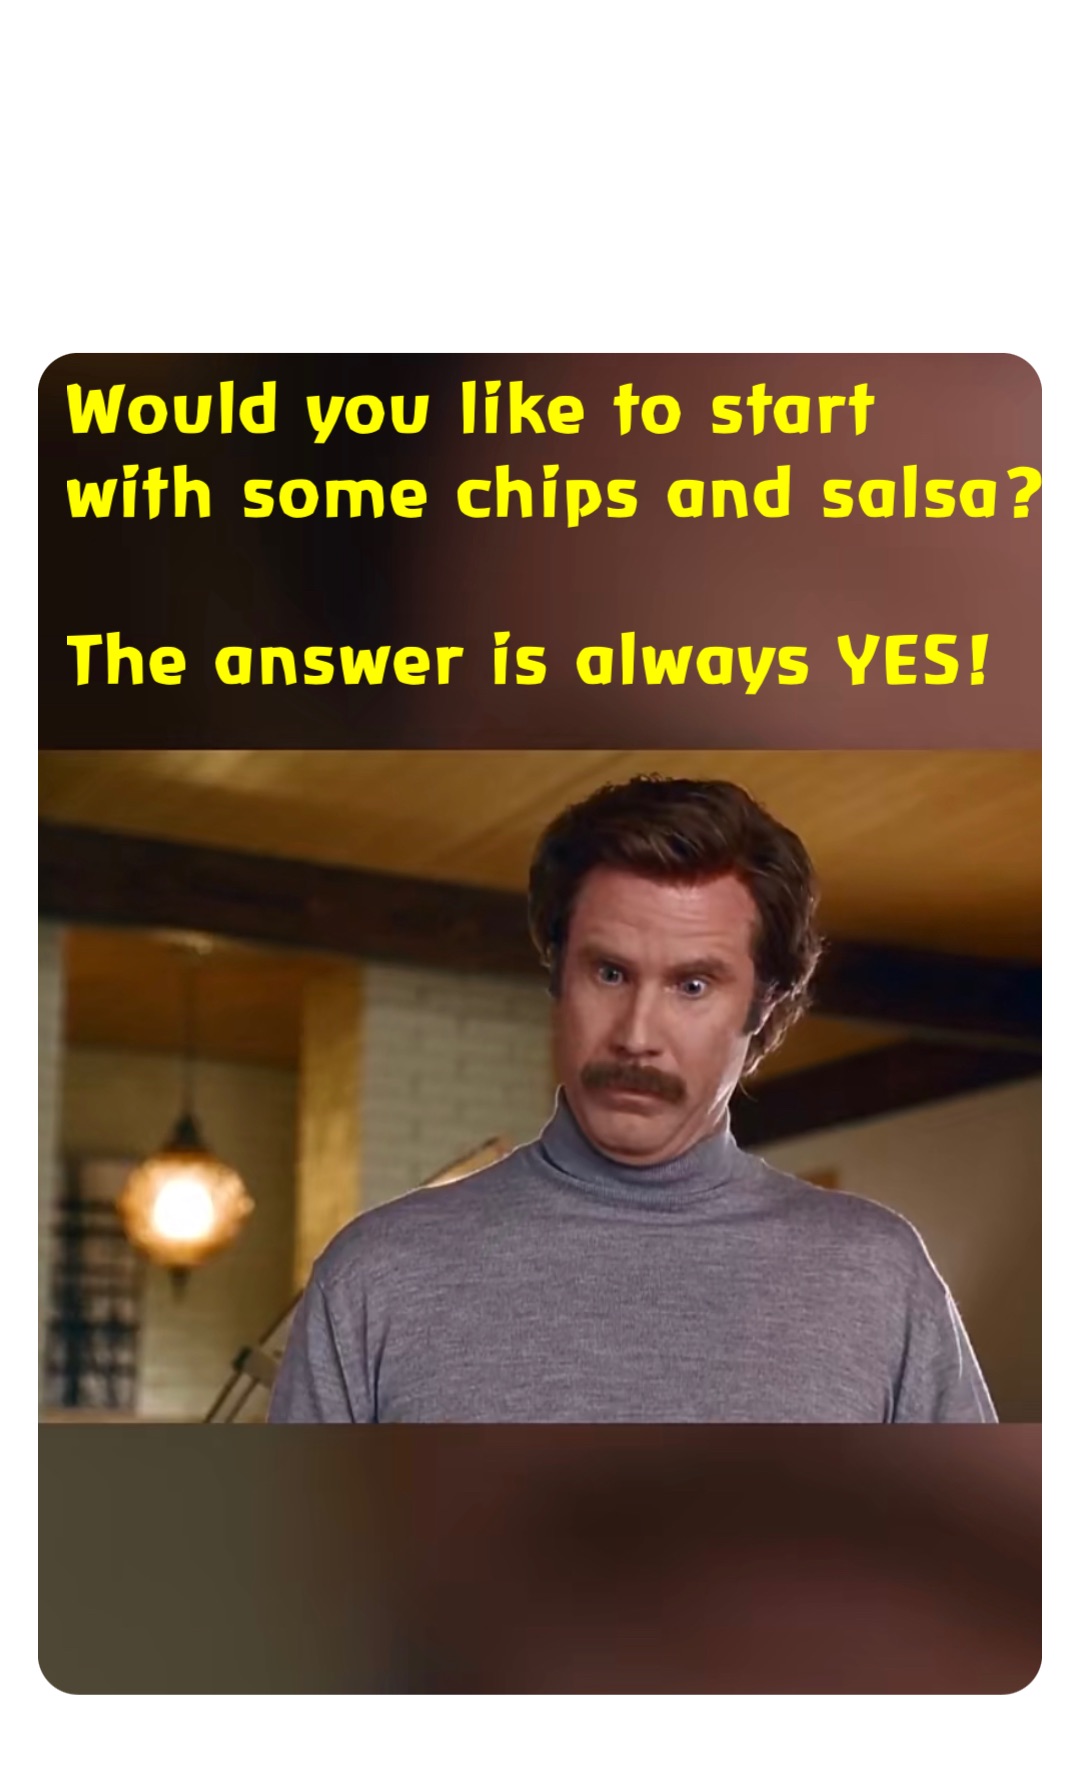 Would you like to start with some chips and salsa?

The answer is always YES!